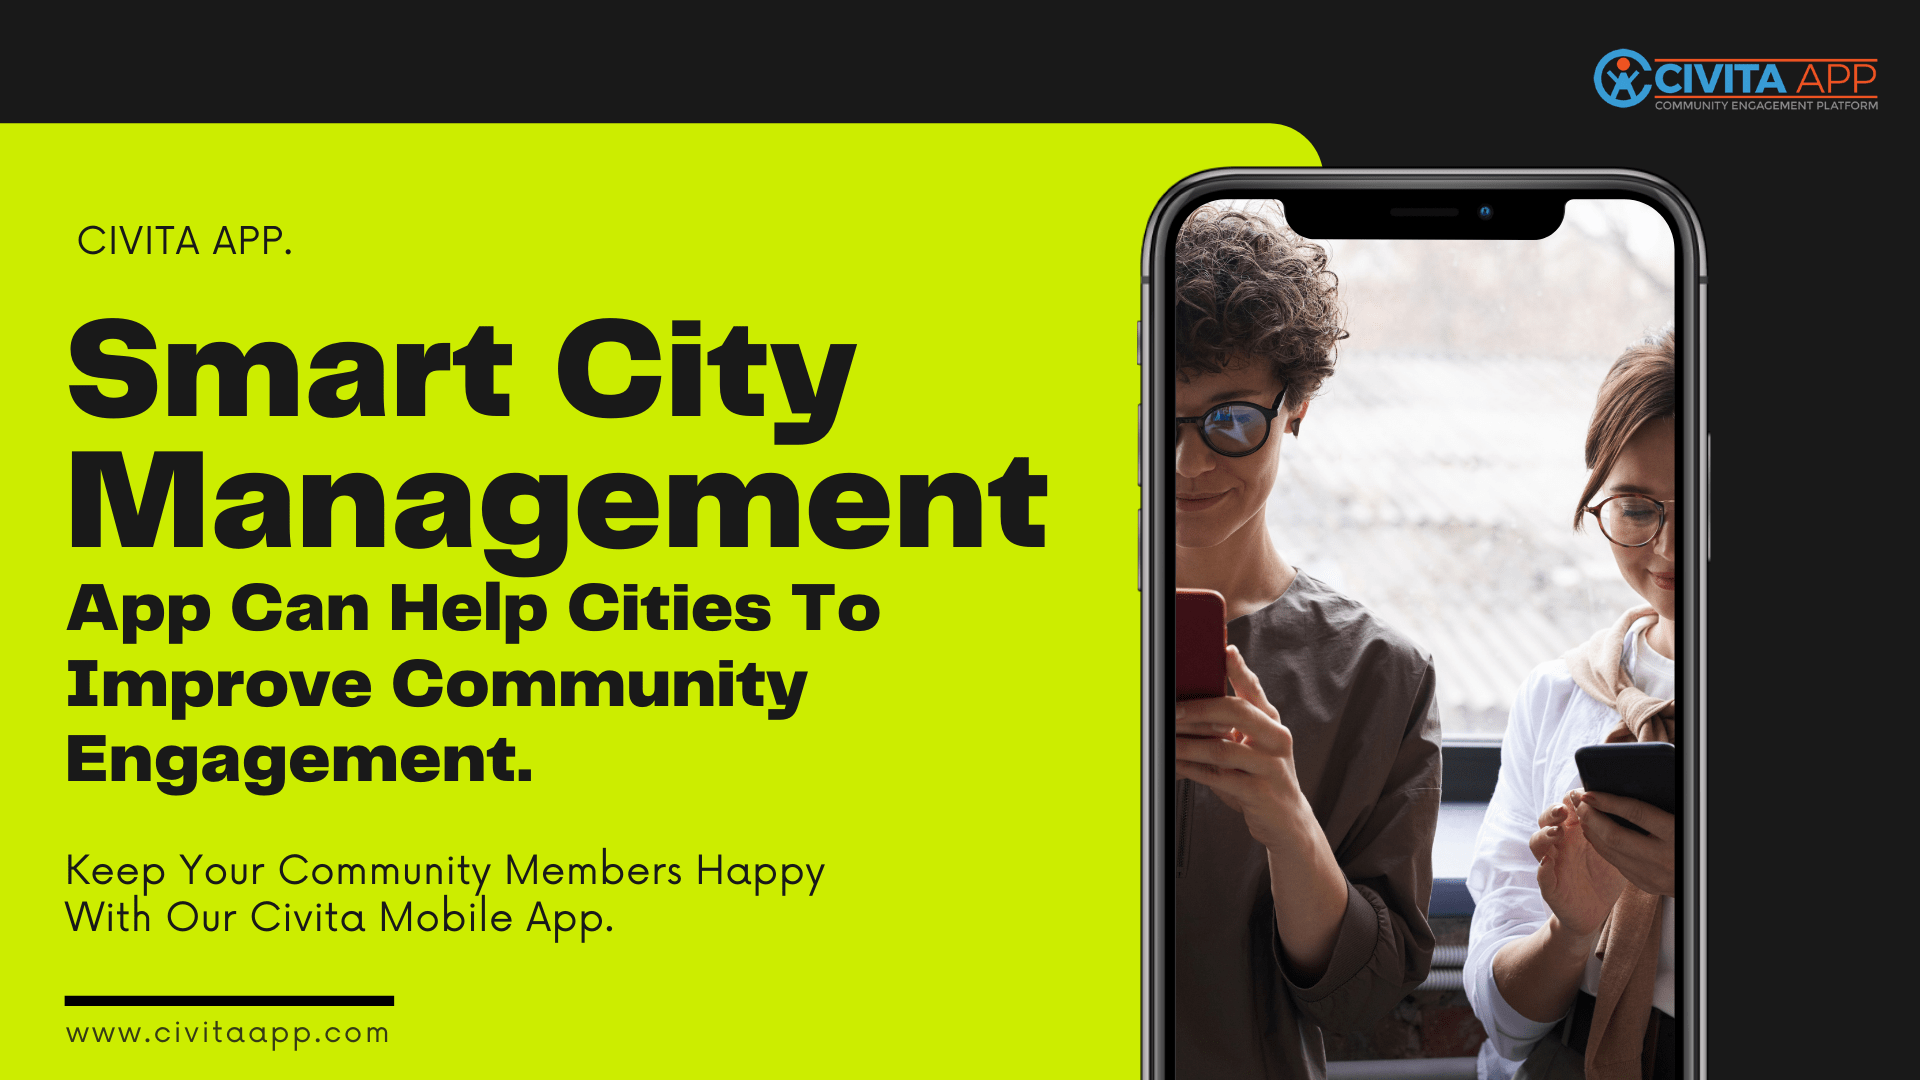 Boost Your Community Engagement with an advanced mobile application | Civita App - Civita App